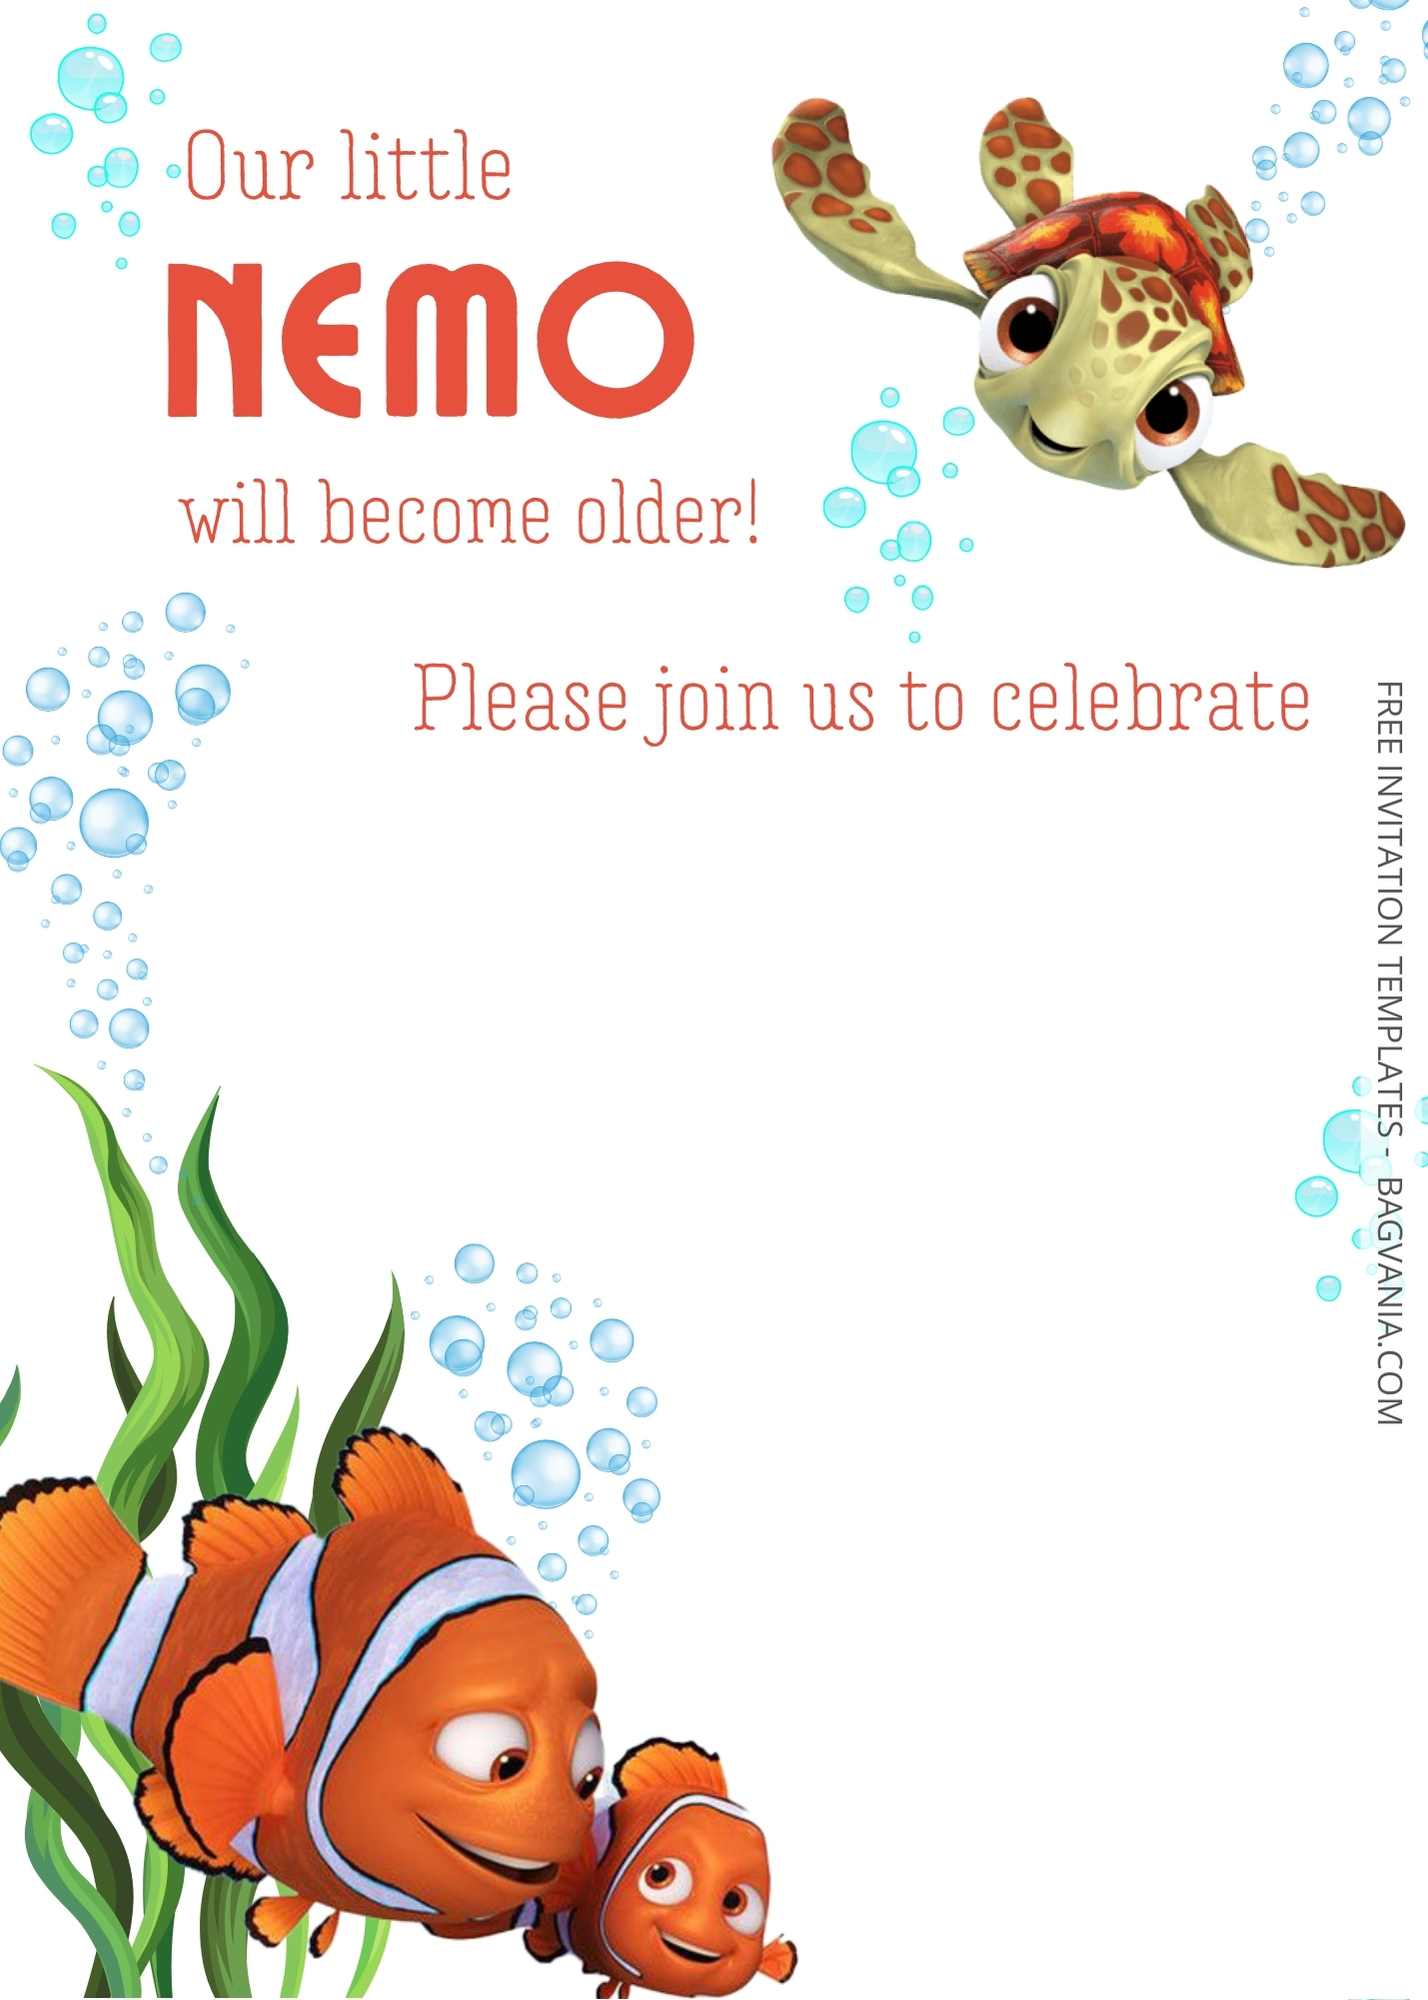 Dive into Fun: Hosting an Unforgettable Finding Nemo Theme Party